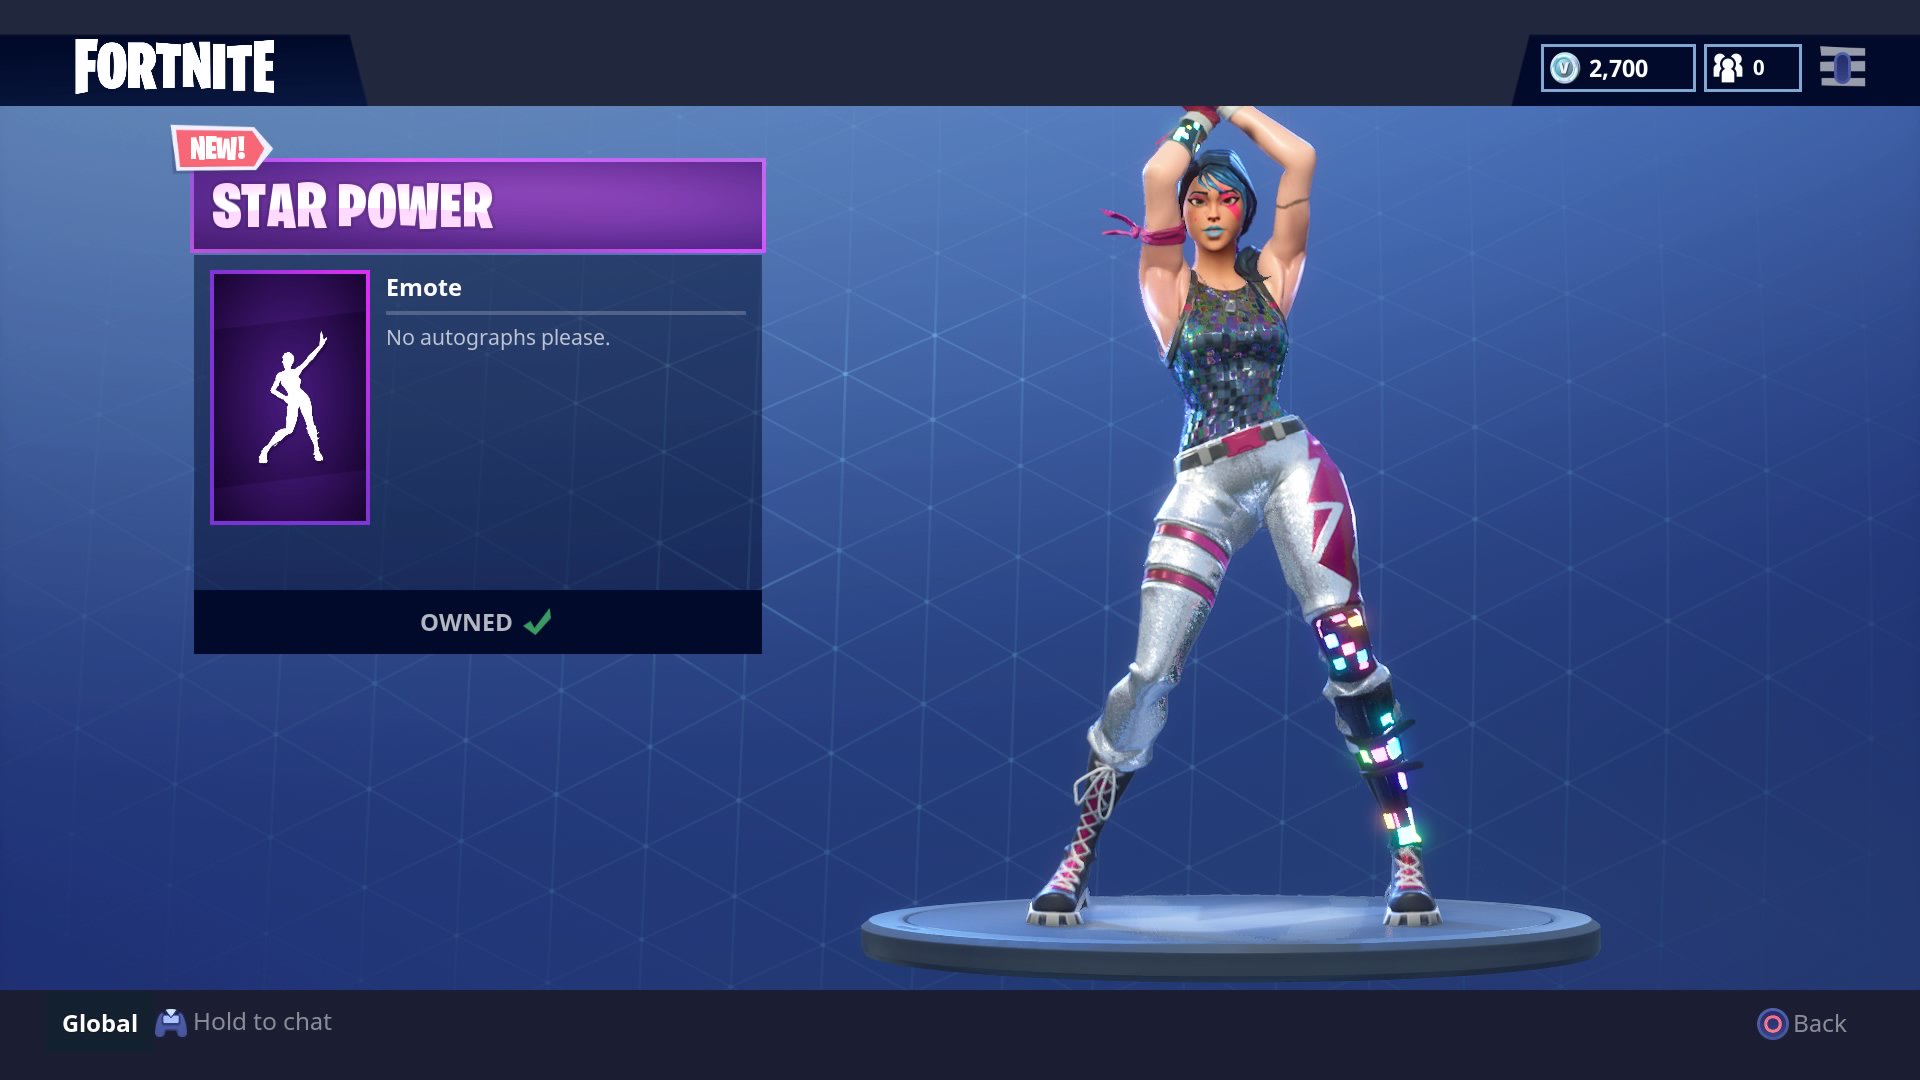 Fortnite Starpower Dance Where Fortnite Star Power Dance Emote Now Available In The Store